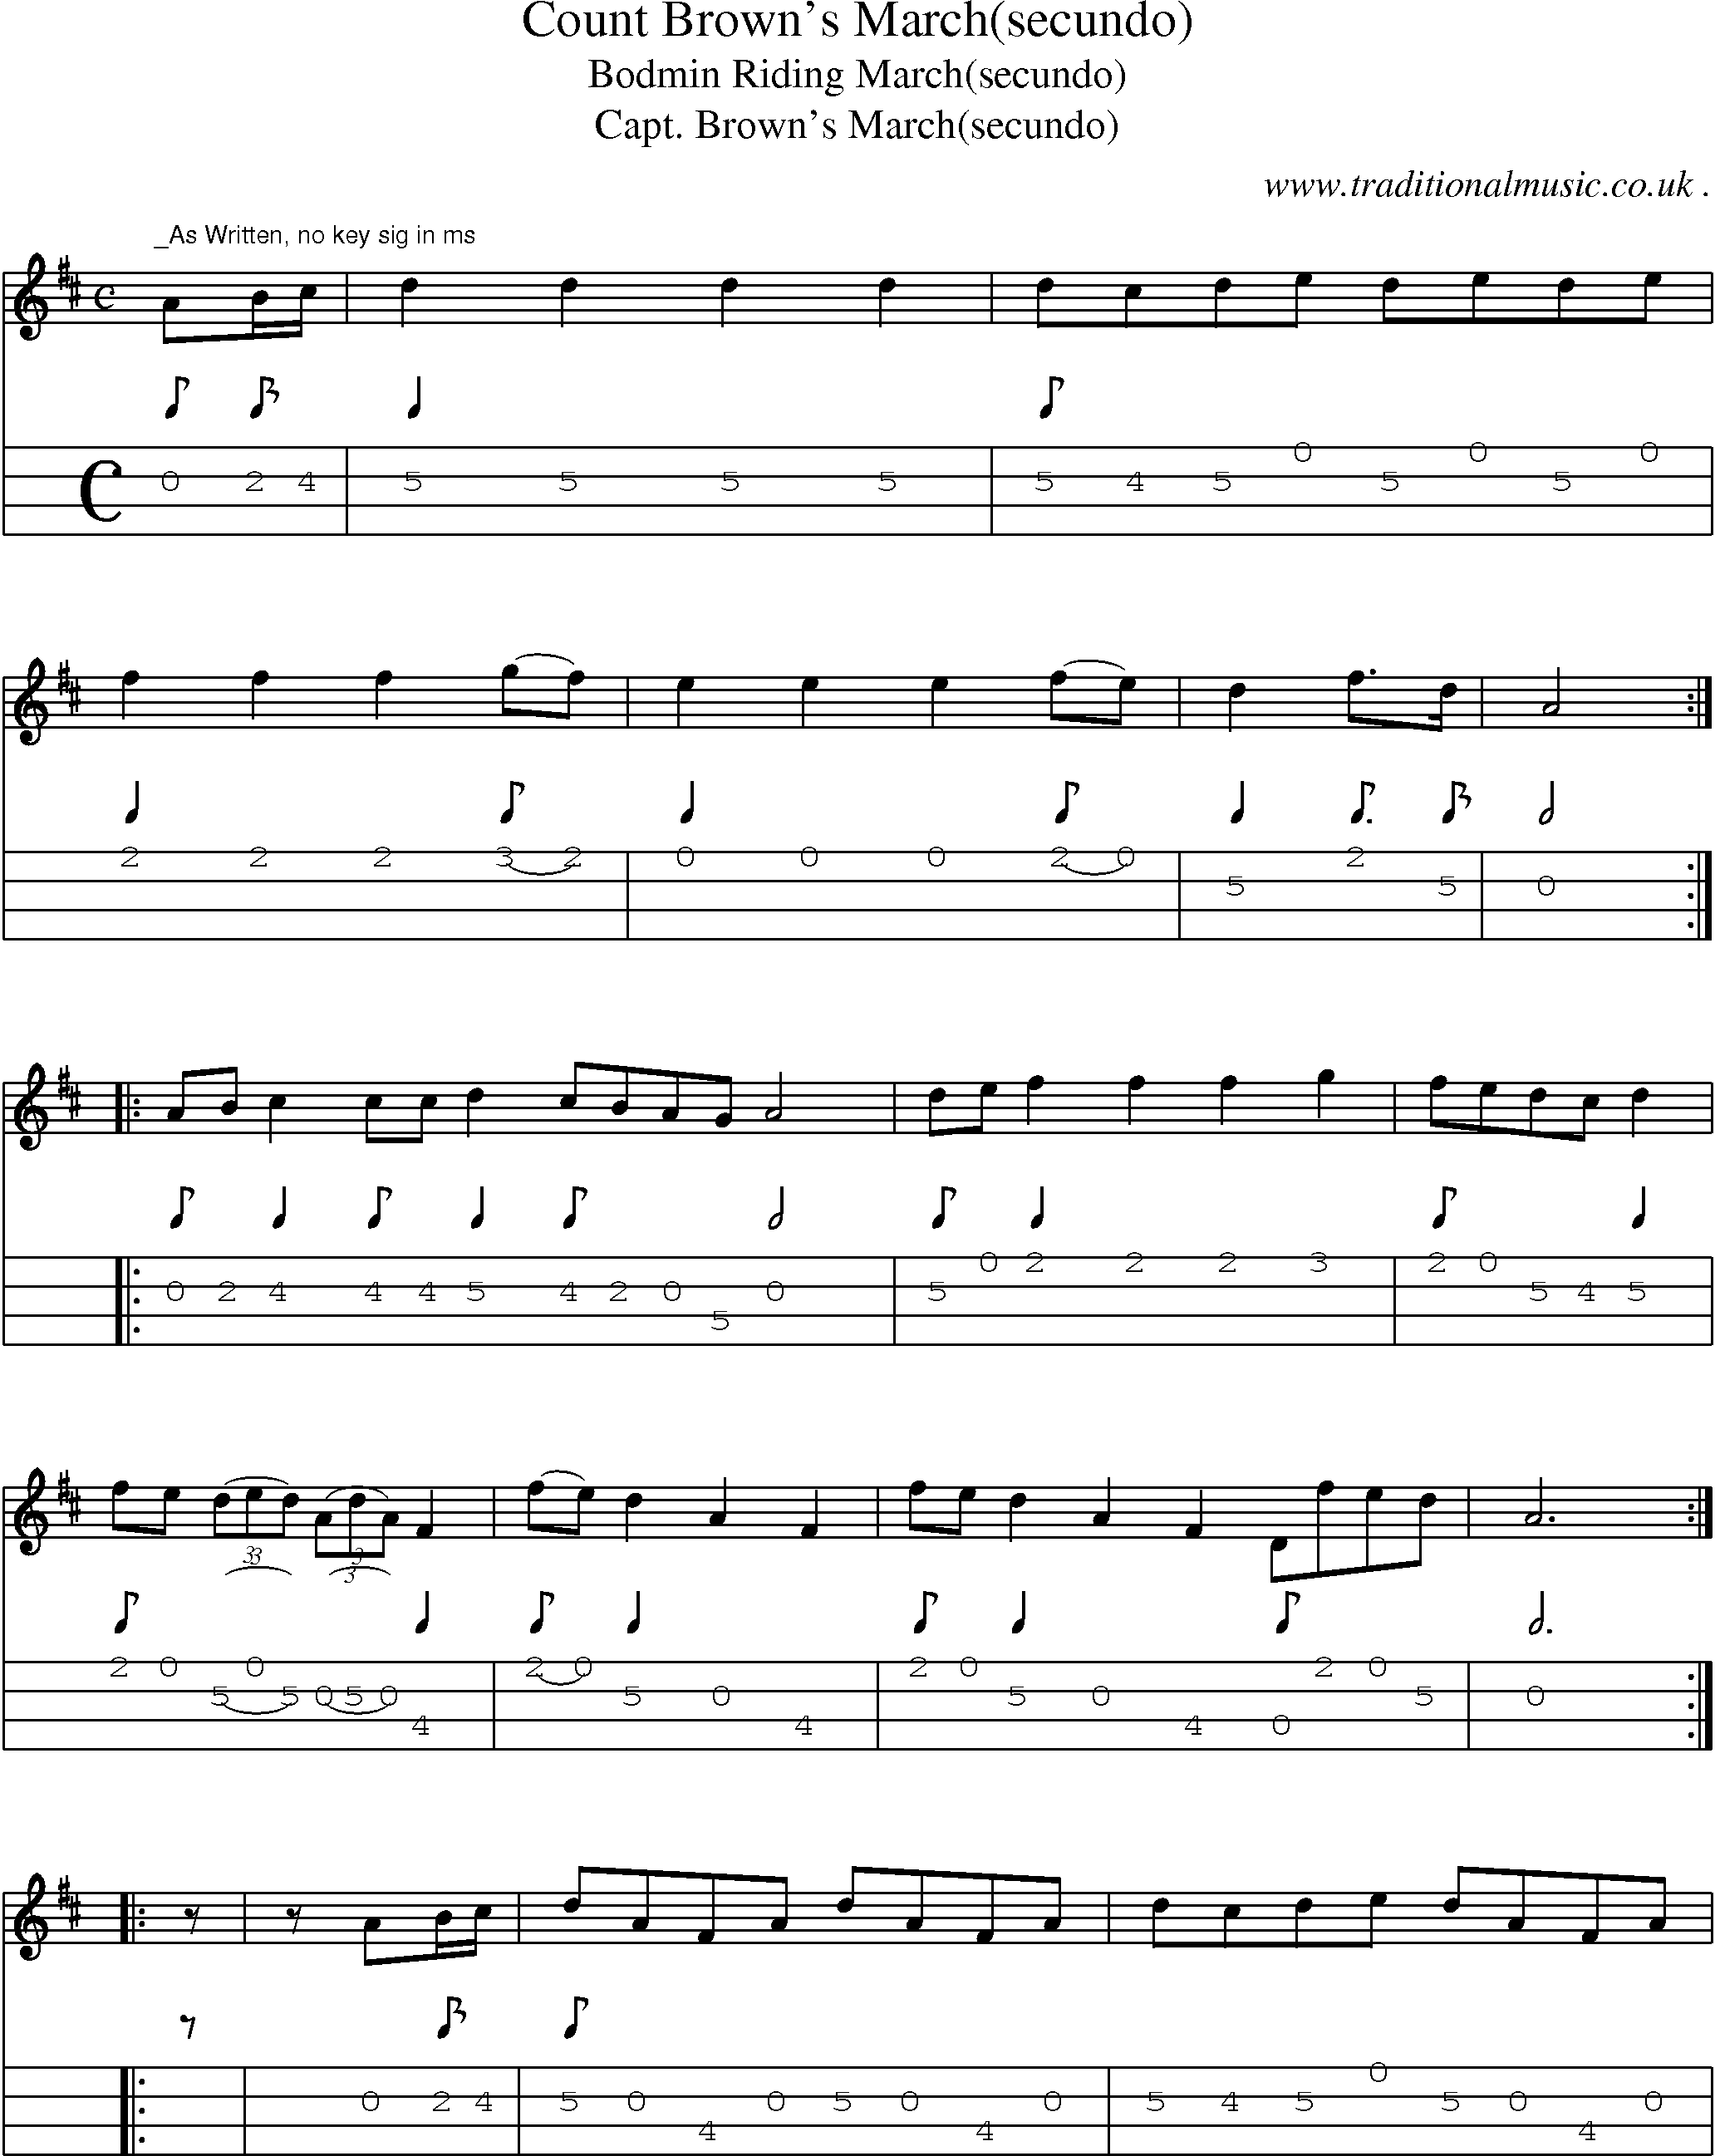 Sheet-Music and Mandolin Tabs for Count Browns March(secundo)